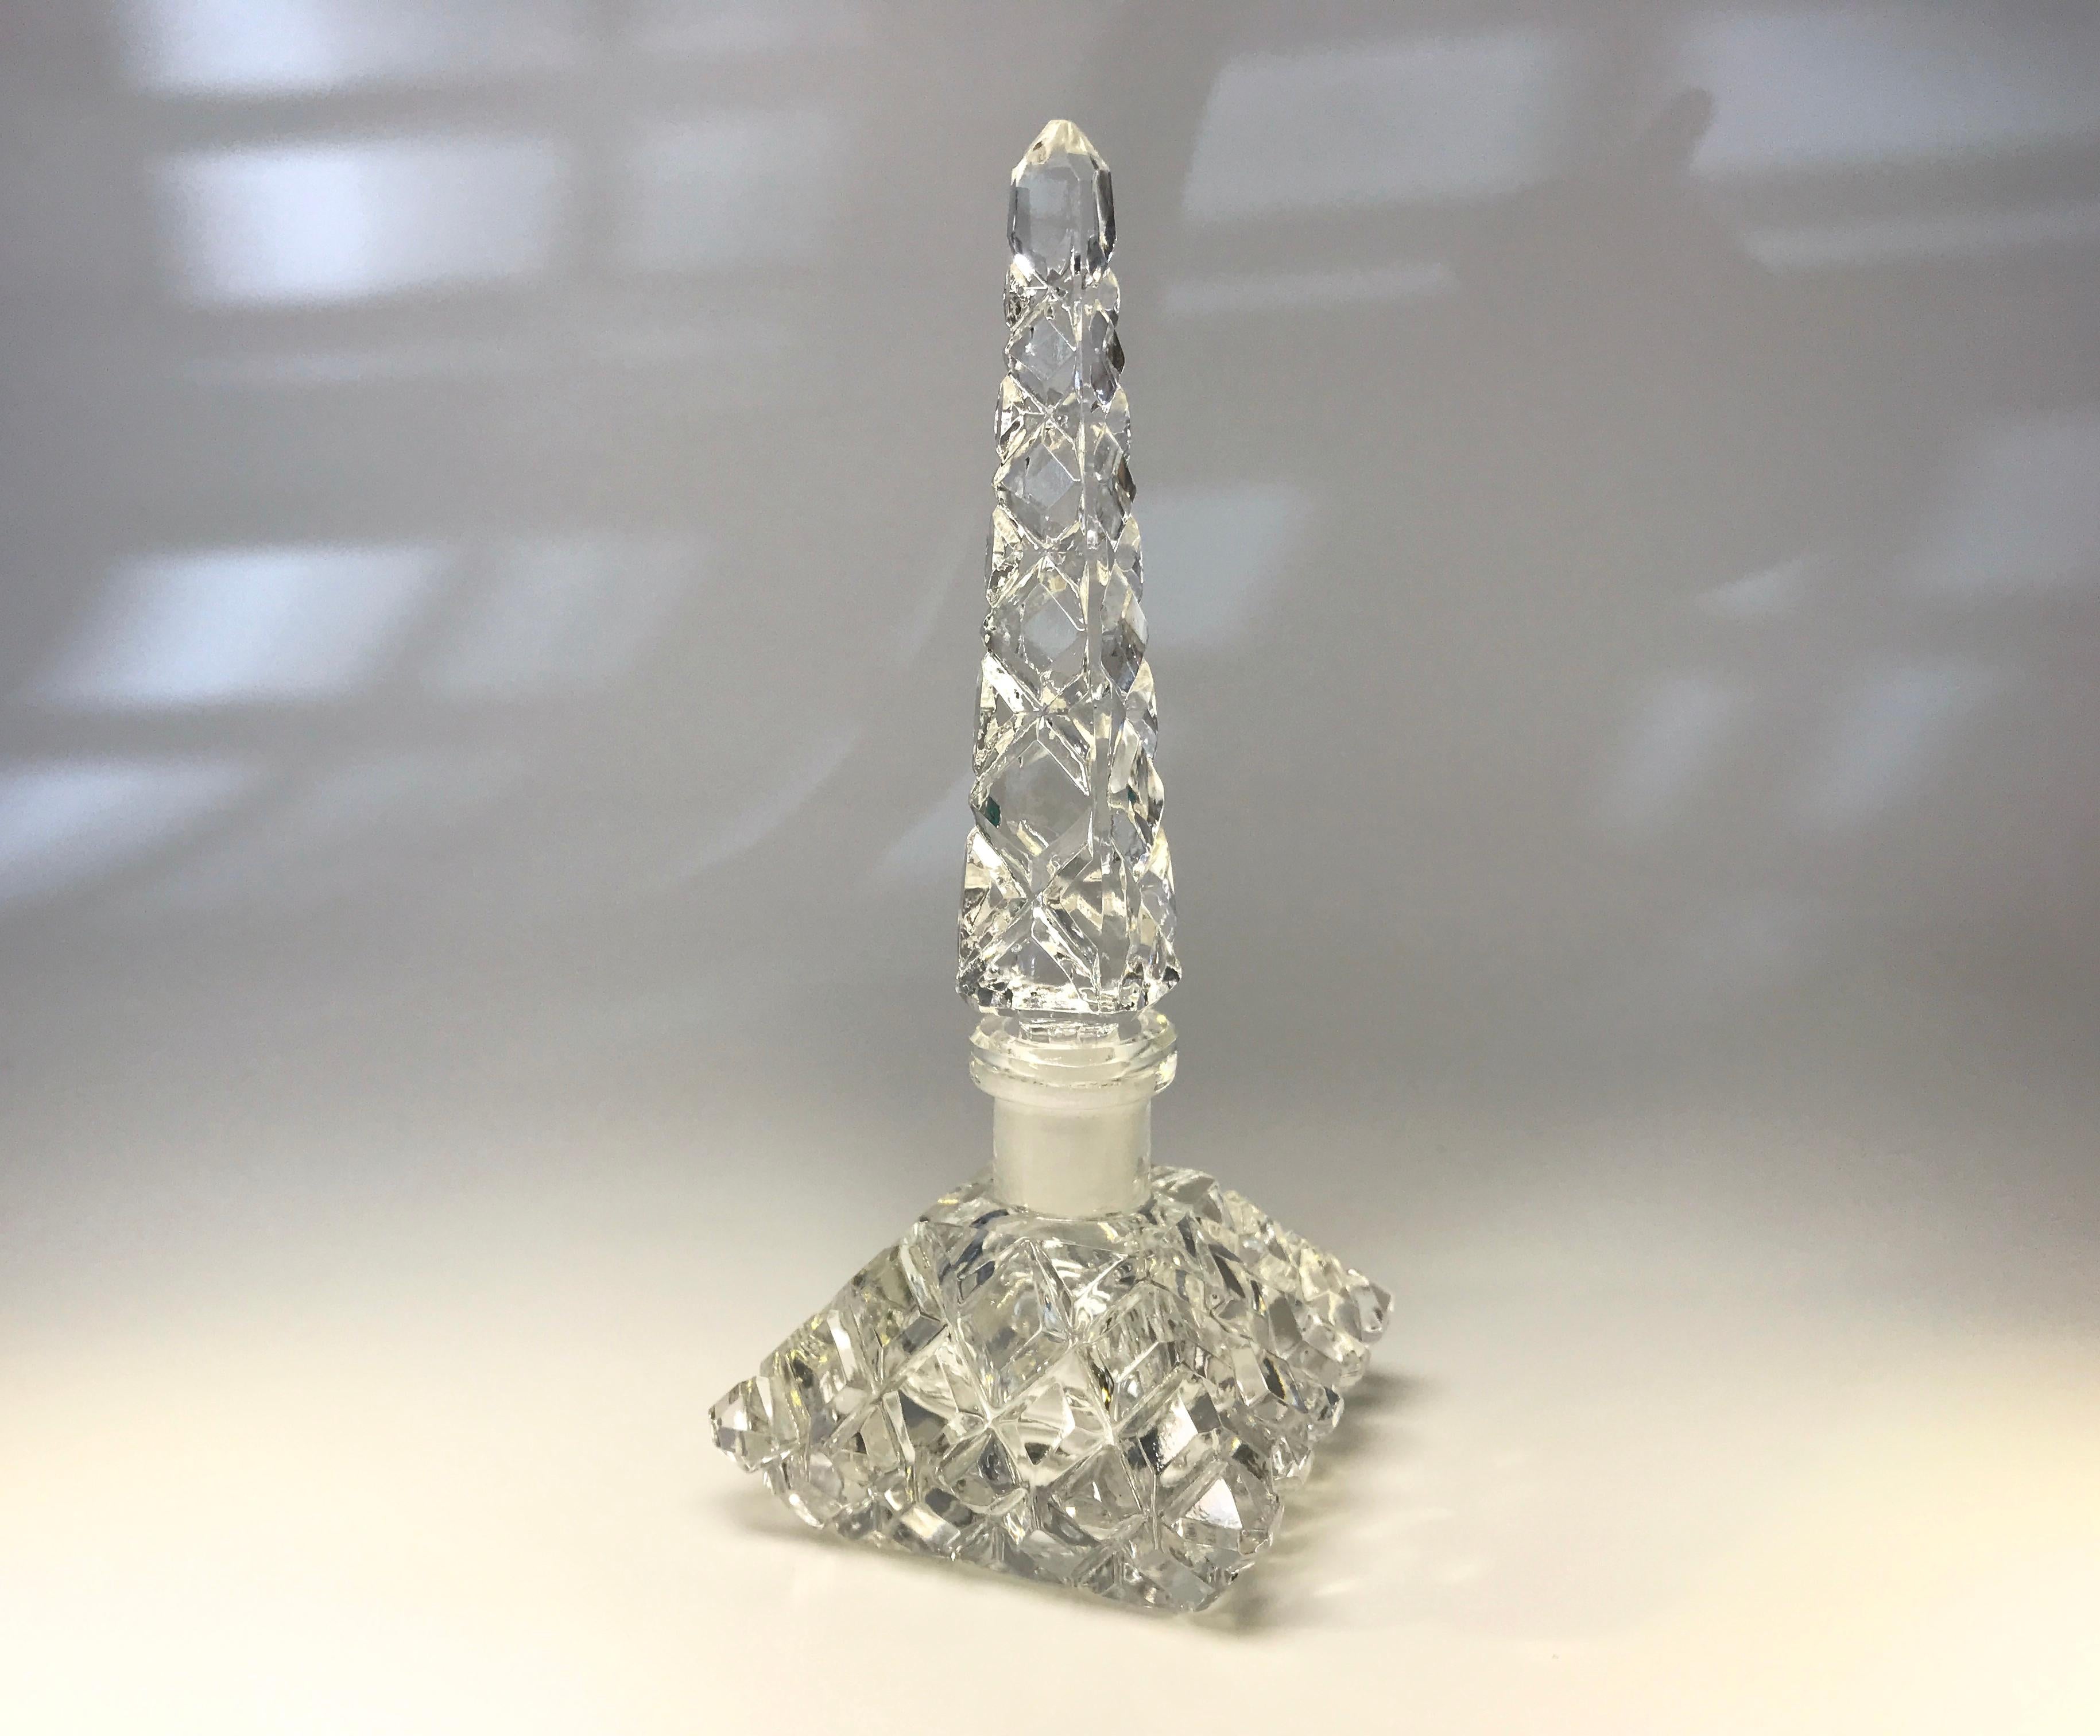 Polished Elegant Czech Crystal Clear Cushion Perfume Bottle Tall Spire Stopper circa 1930